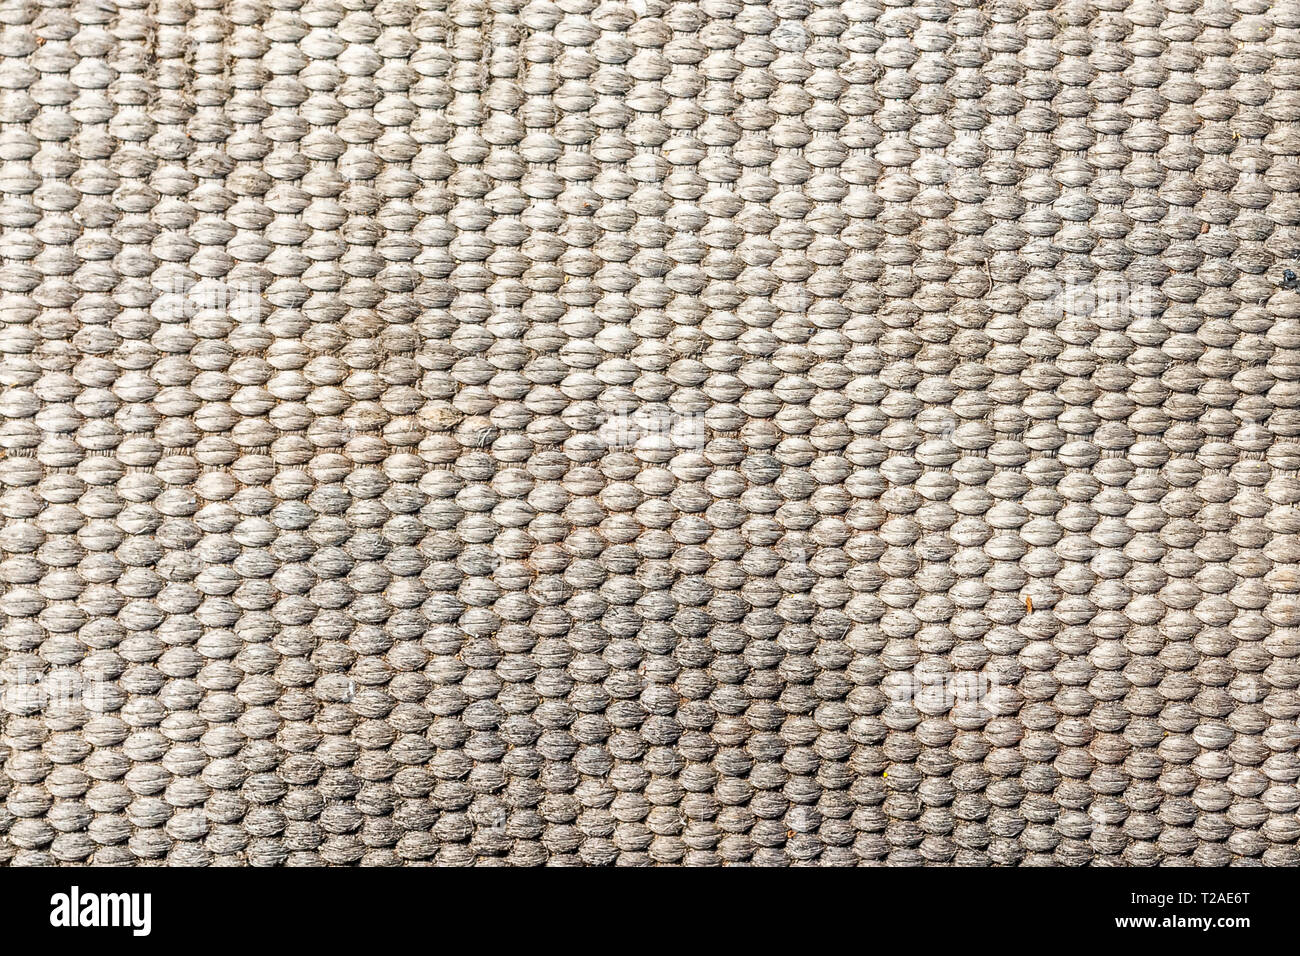 Background texture of an old fire hose or a repeating pattern for mockup or design pattern in a construction, food or industrial flat layer of sample  Stock Photo